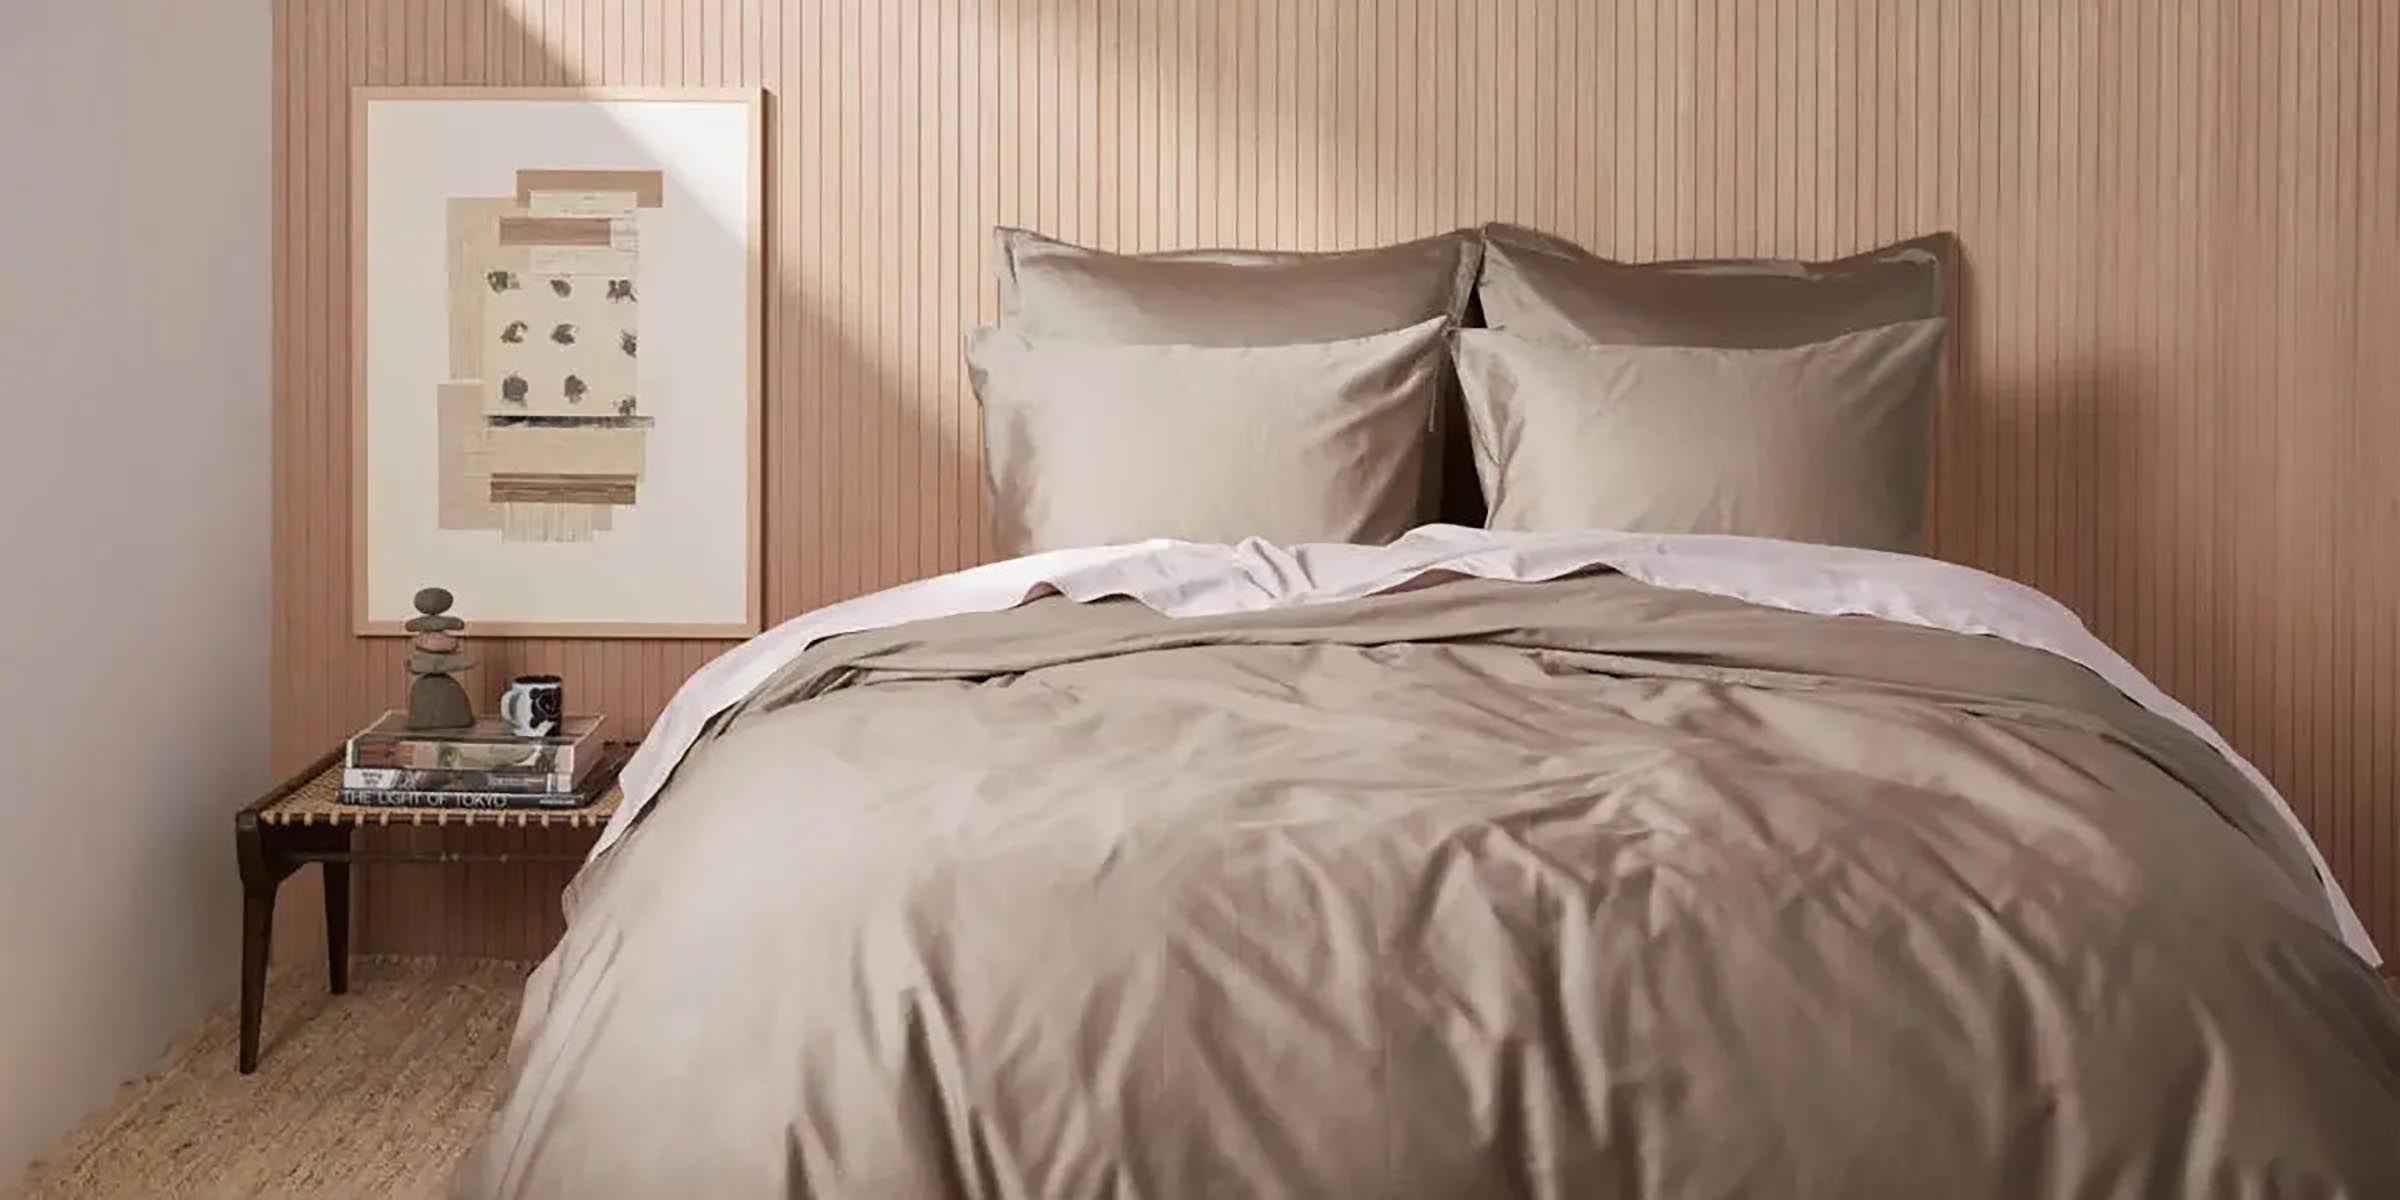 Hotel-Style Bed Sheets To Live The Dream Of Five-Star Luxury, At Home